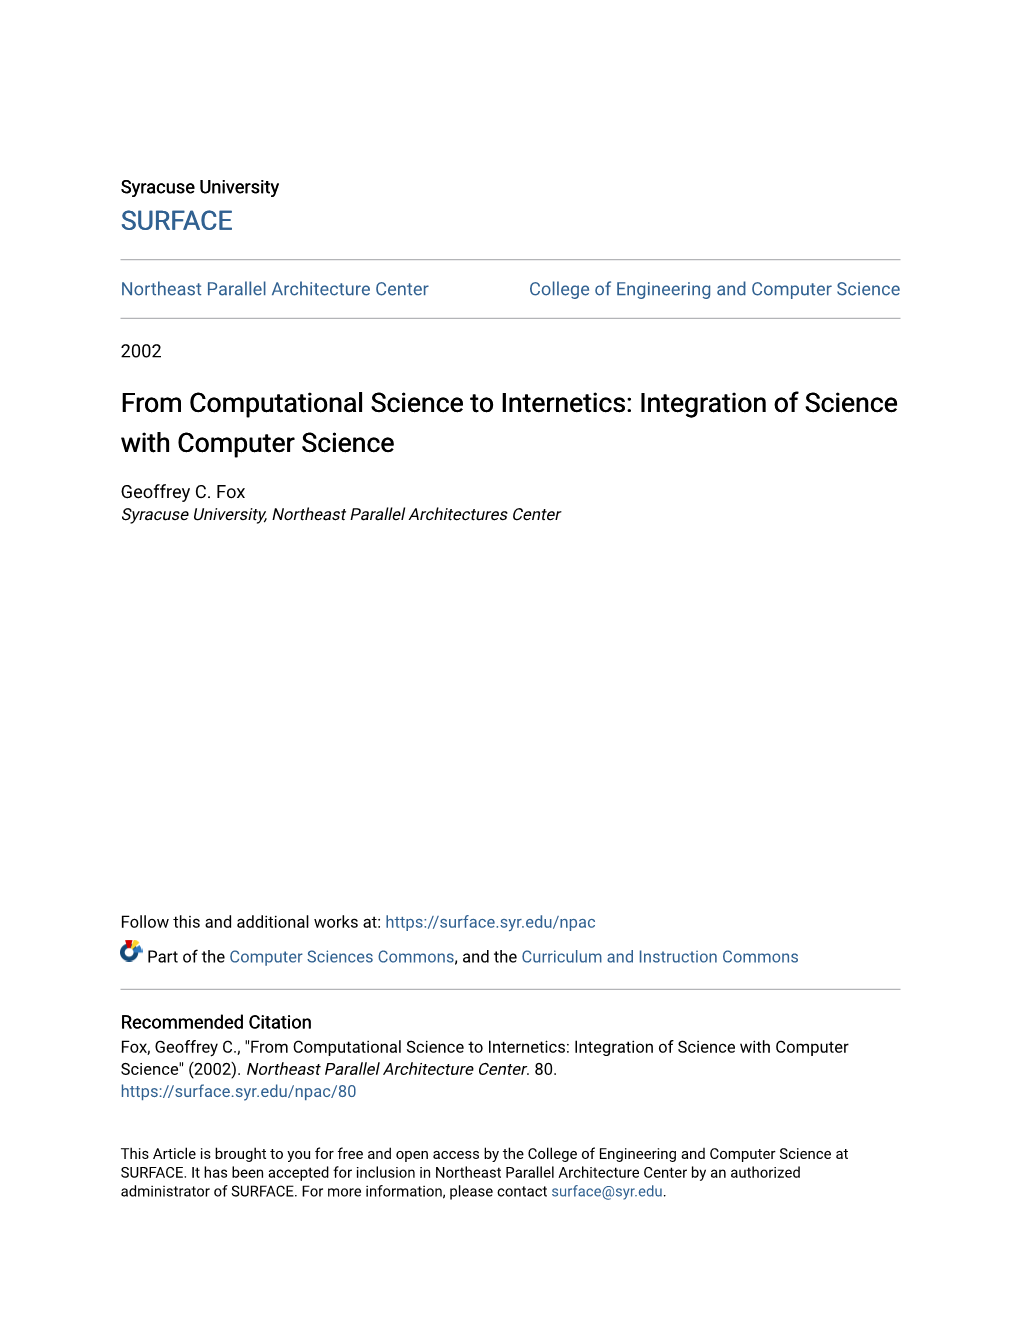 From Computational Science to Internetics: Integration of Science with Computer Science